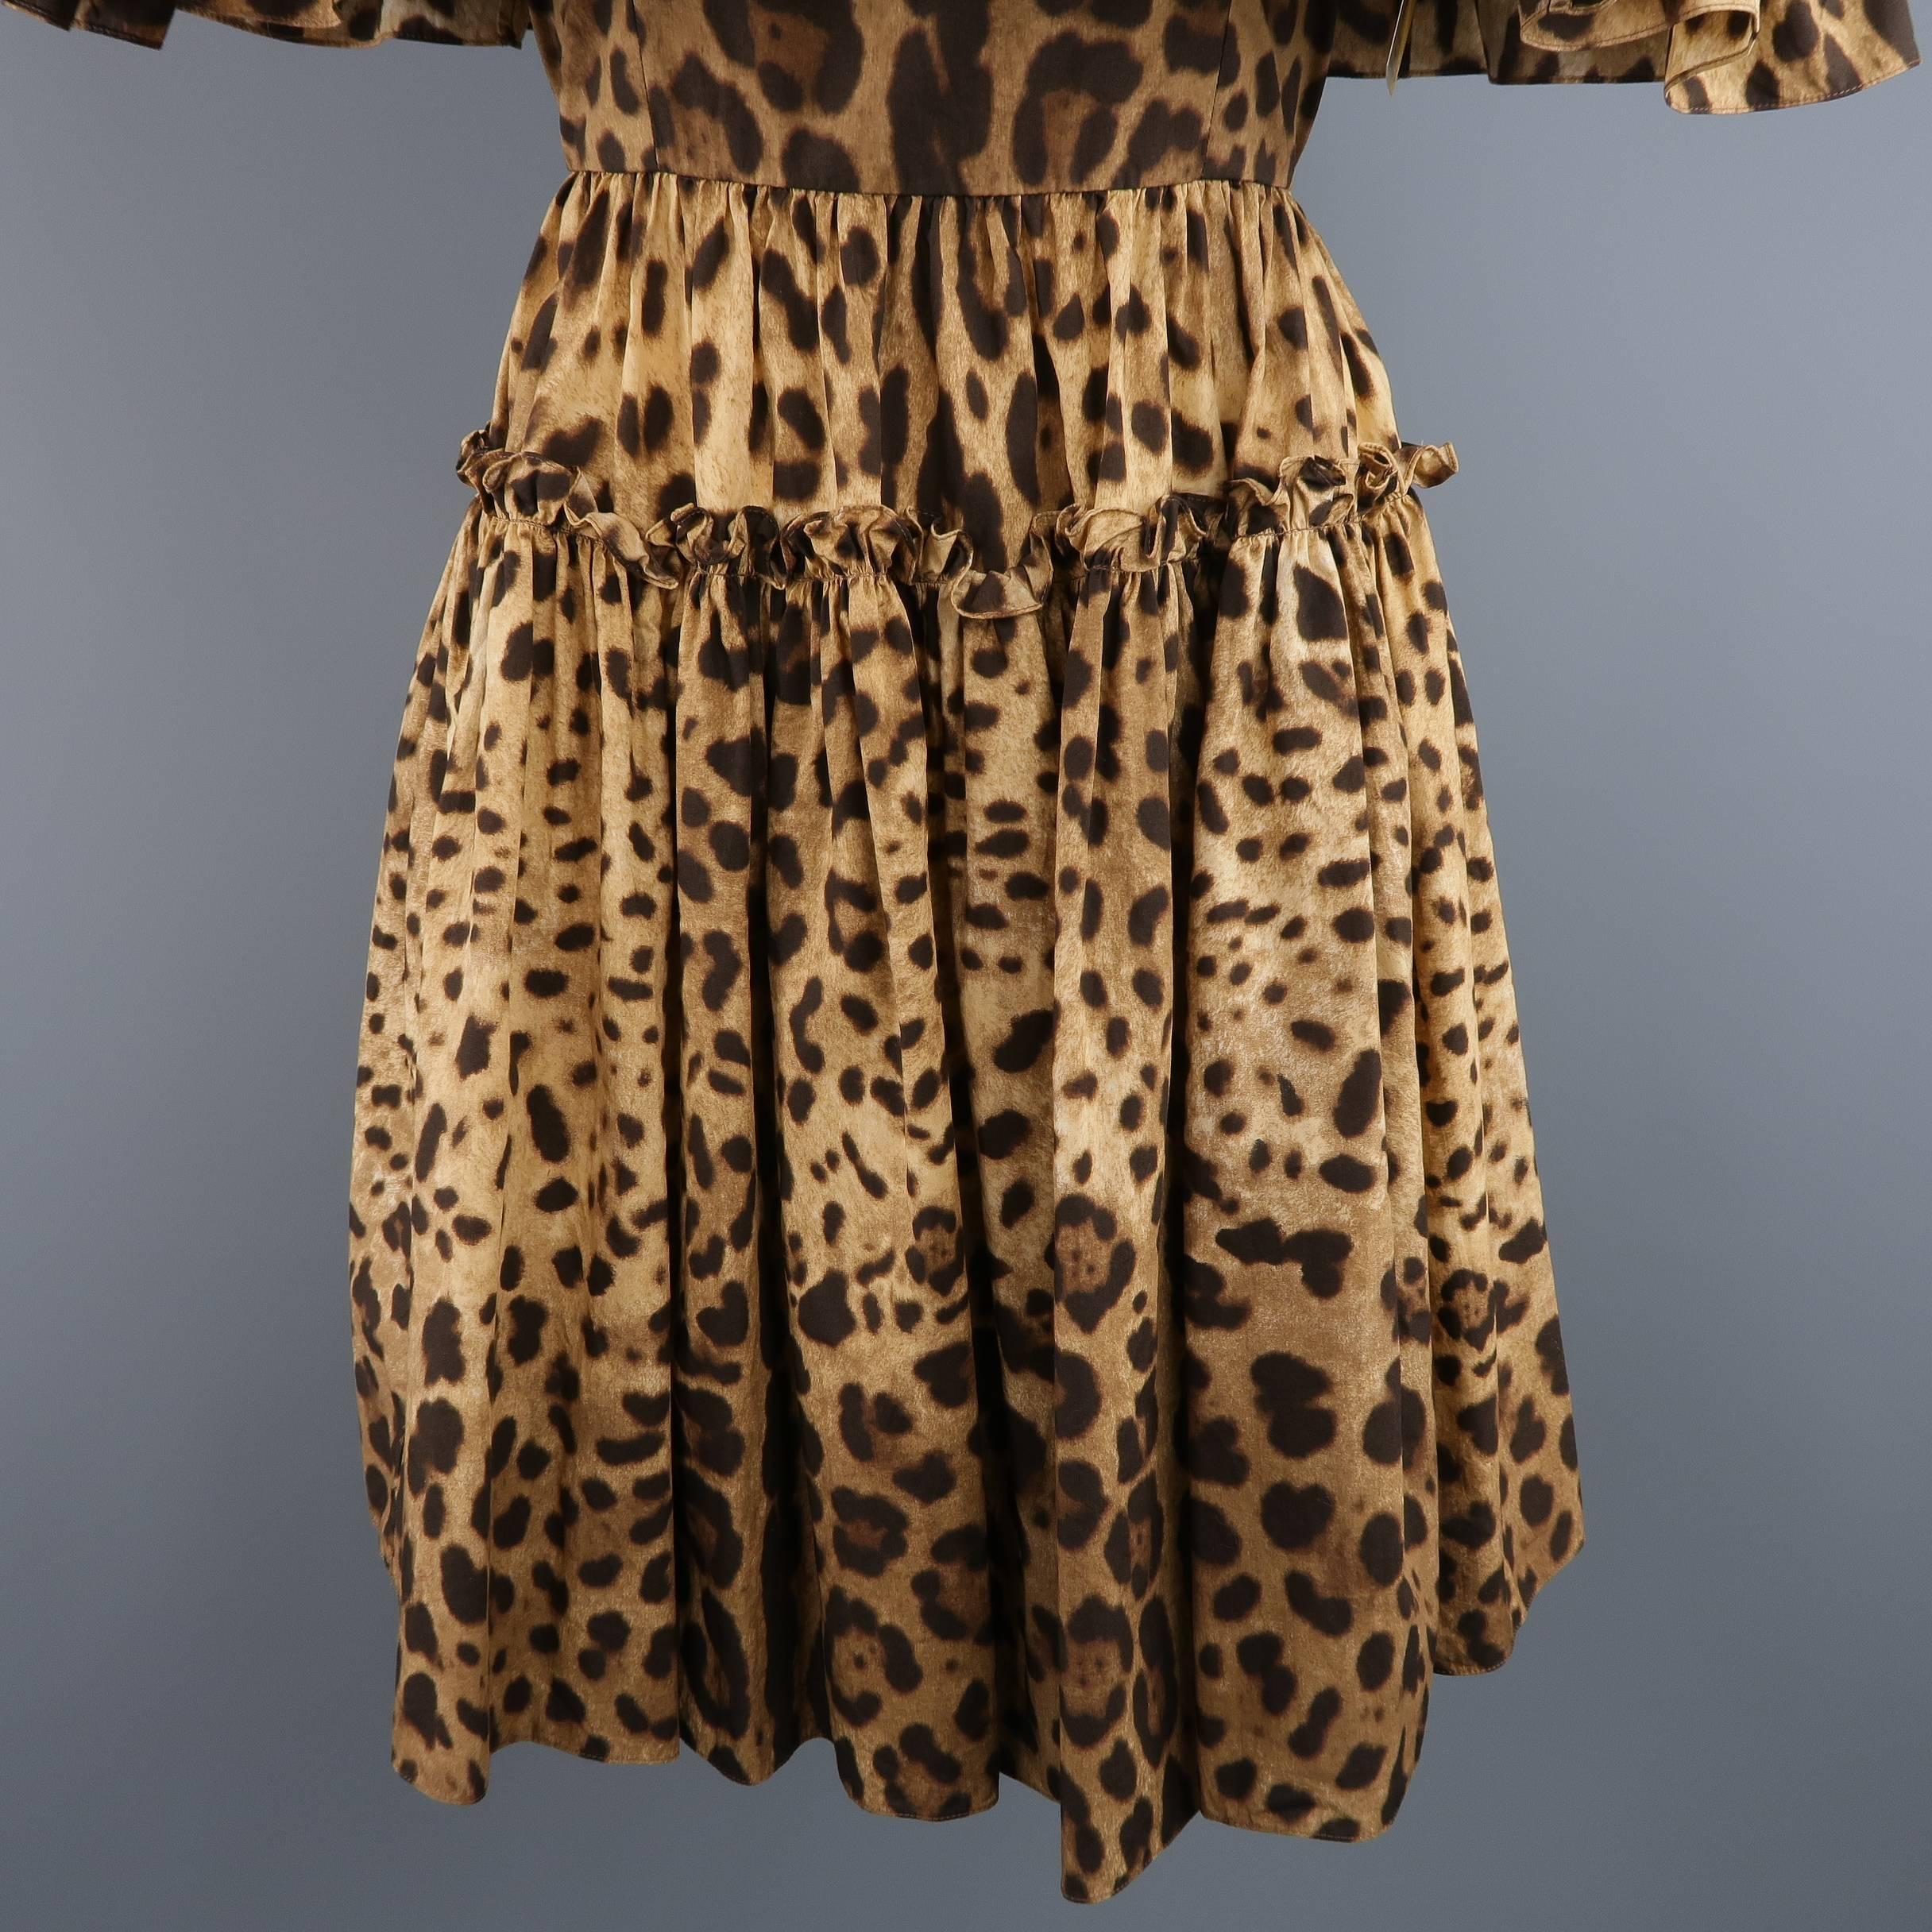 This fun DOLCE & GABBANA dress comes in a light weight leopard cheetah print cotton and features a ruffled off the shoulder neckline with straps, fitted mid section and ruffled flair skirt. Made in Italy.
 
Excellent Pre-Owned Condition.
Marked: IT